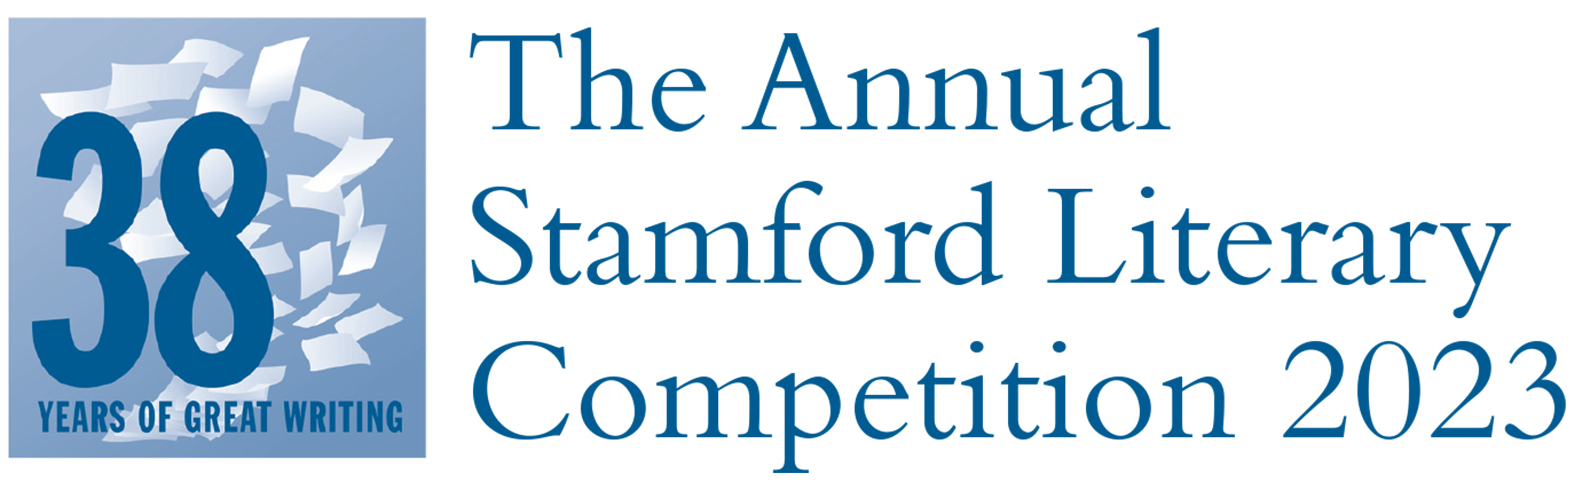 The Stamford Literary Competition 2023 header: 38 Years of Great Writing